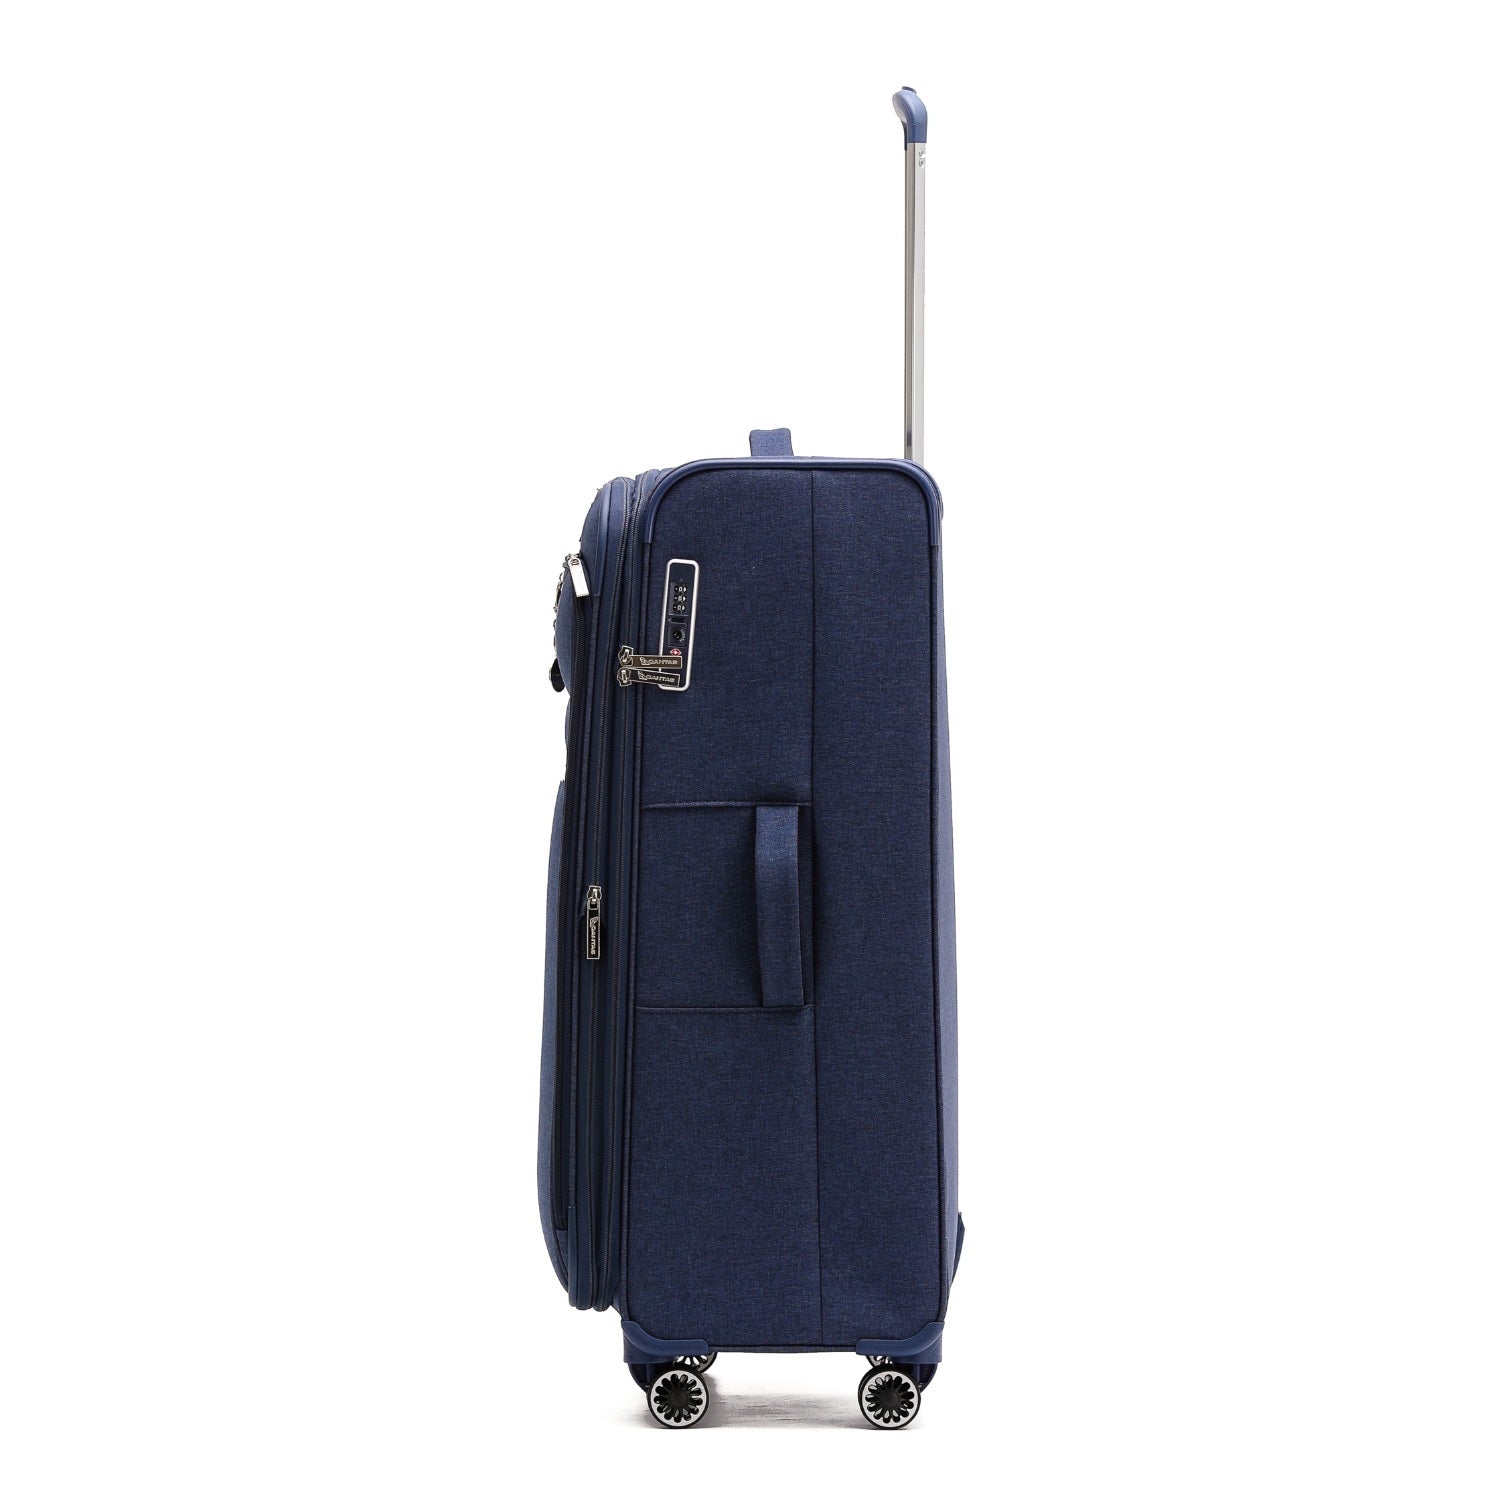 Qantas - QF400 81cm Large Adelaide Soft sided spinner - Navy - 0